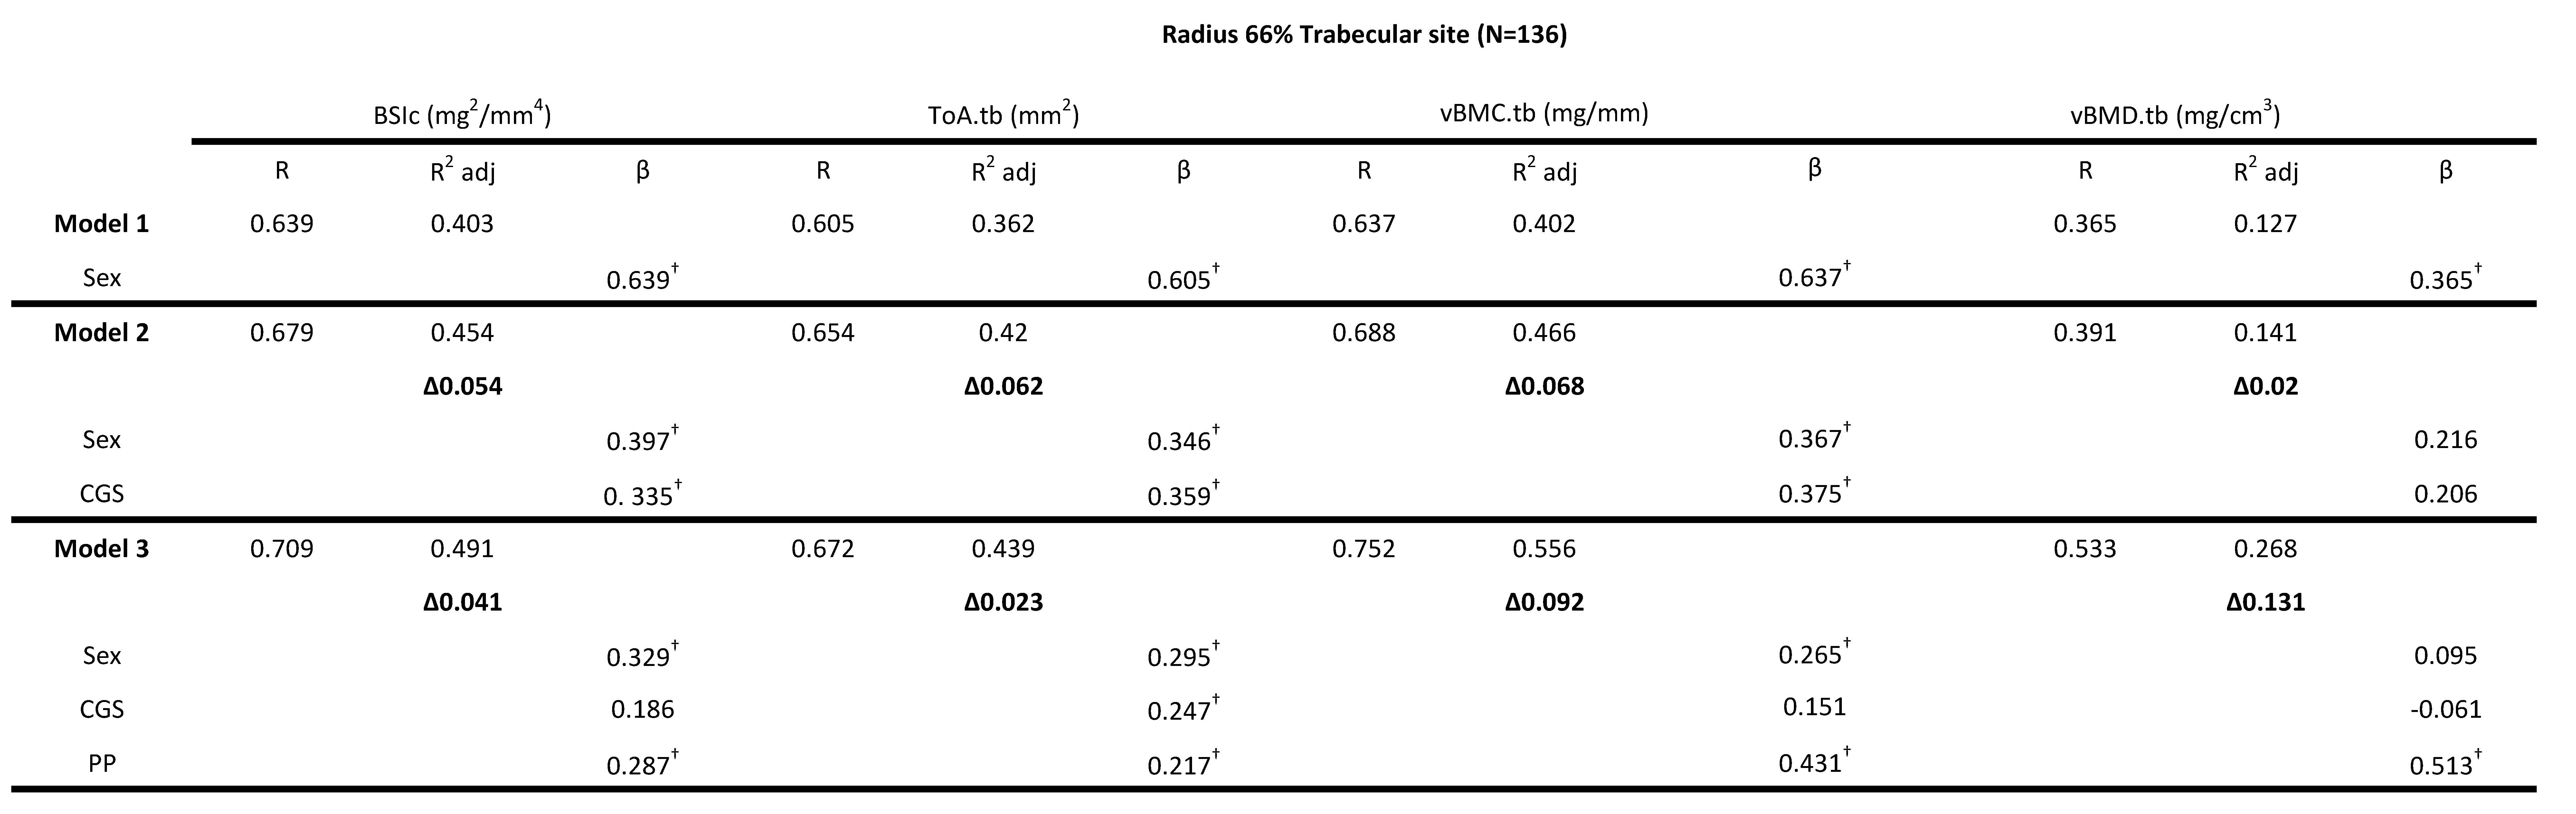 <b>Table 3</b>: Hierarchical multiple regression (HMR) analyses for predicting Bone Strength Index, BSIc (mg<sup>2</sup>/mm<sup>4</sup>), Total Area ToA.tb (mm<sup>2</sup>), Bone Mineral Content, vBMC.tb (mg/mm) and Bone Mineral Density vBMD.tb (mg/cm<sup>3</sup>) at the 4\%radial site using sex, absolute combined grip strength (CGS) and peak power (PP) as predictor variables. &beta; is the Standardized beta coefficient indicates the predictive power. Adjusted coefficient of determination (R<sup>2</sup> Adj) provides the amount of variation explained by the regression model.    &Delta; indicates change in R<sup>2</sup> from model 1 (bold). &dagger; Indicates a significant &beta;